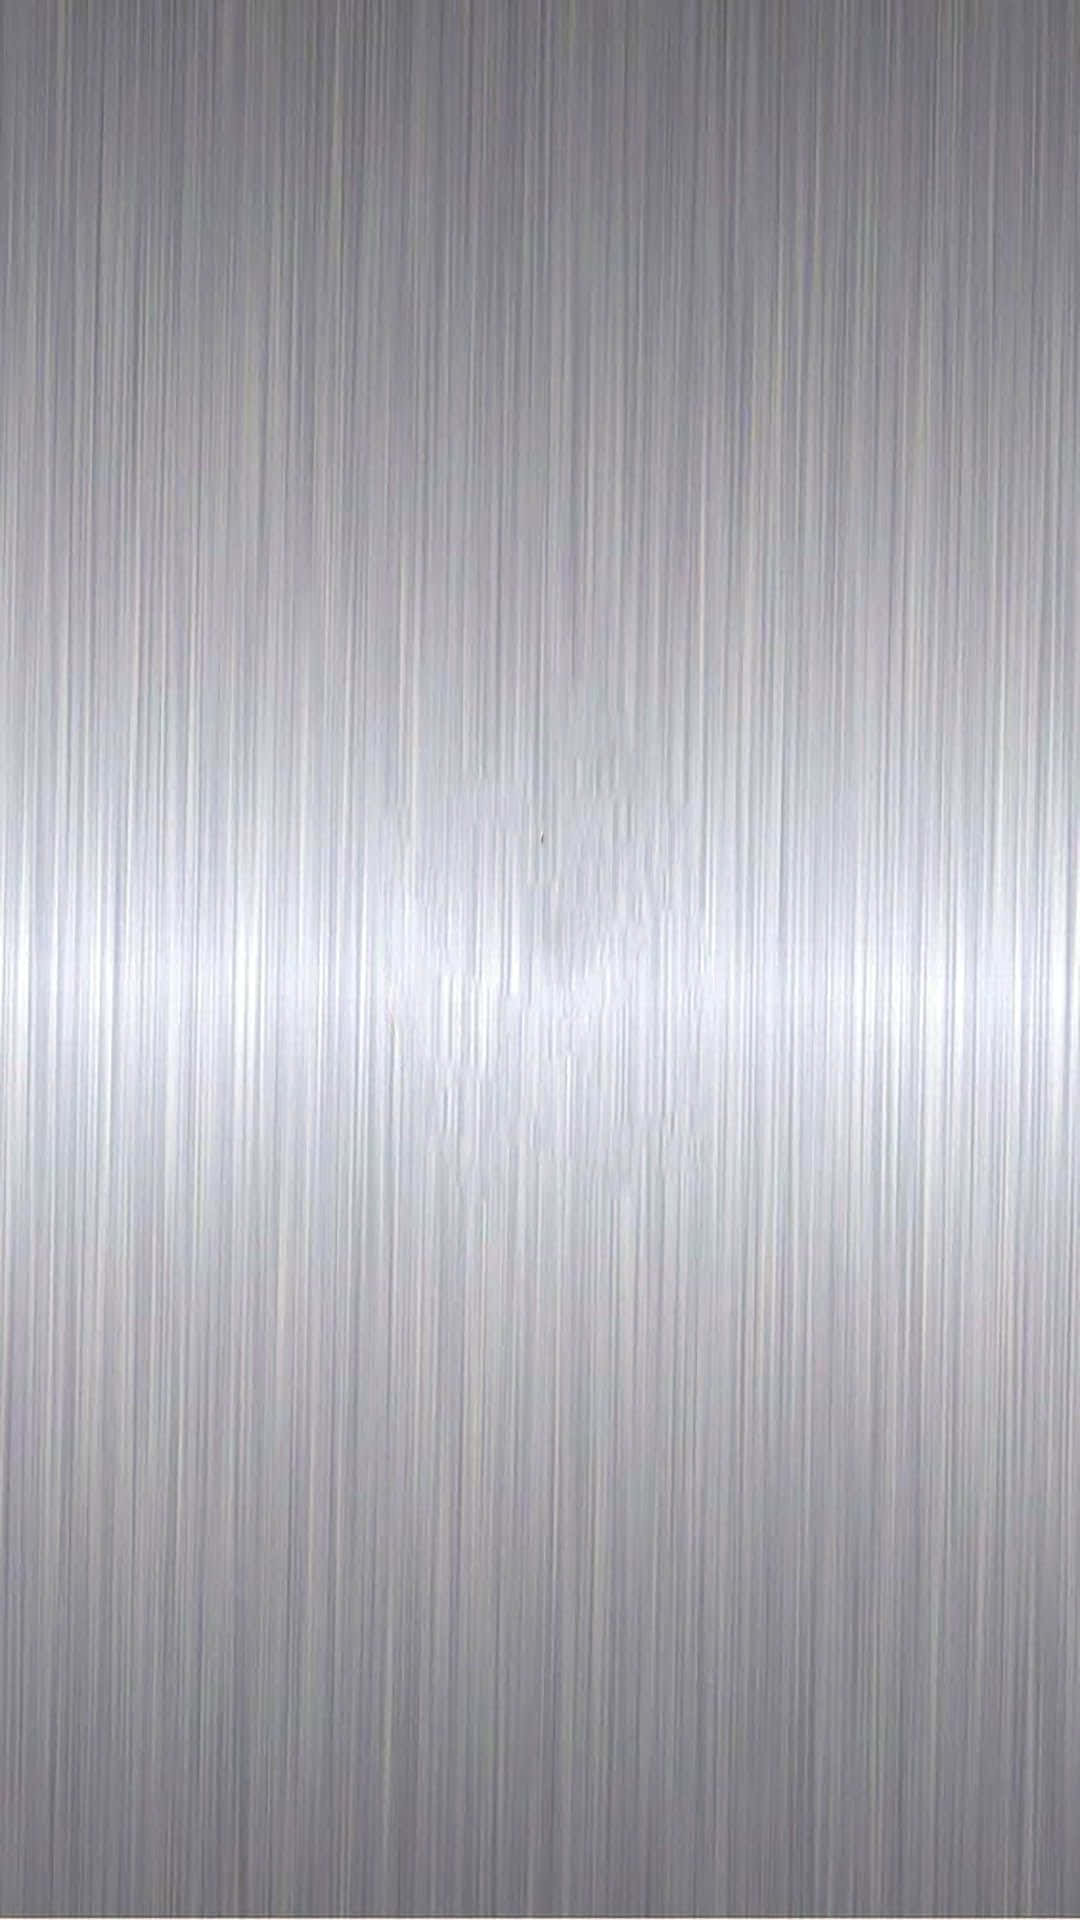 A Silver Metal Background With A Textured Surface Wallpaper